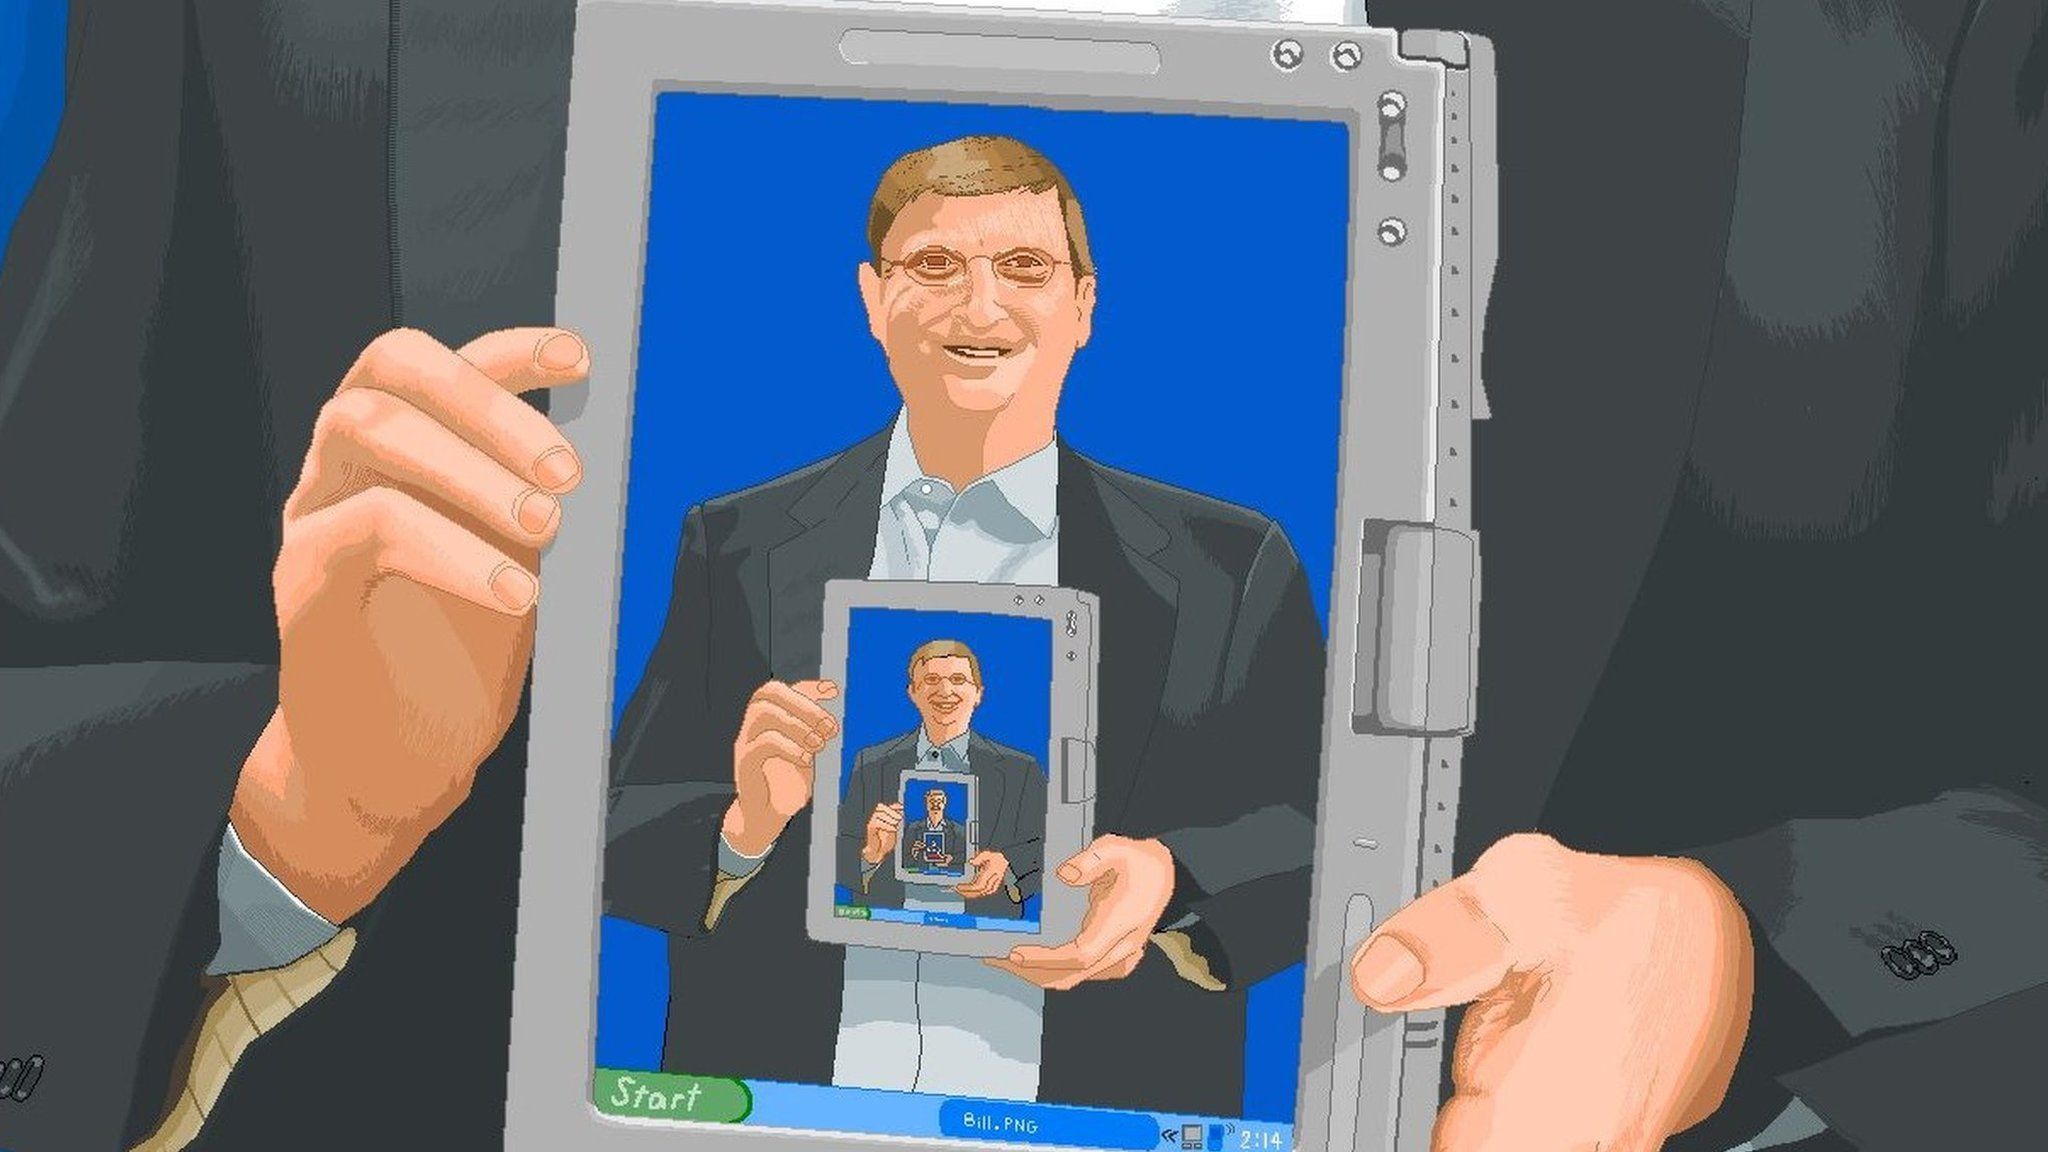 Bill Gates holding an ipad featuring Bill Gates holding an ipad, and so on